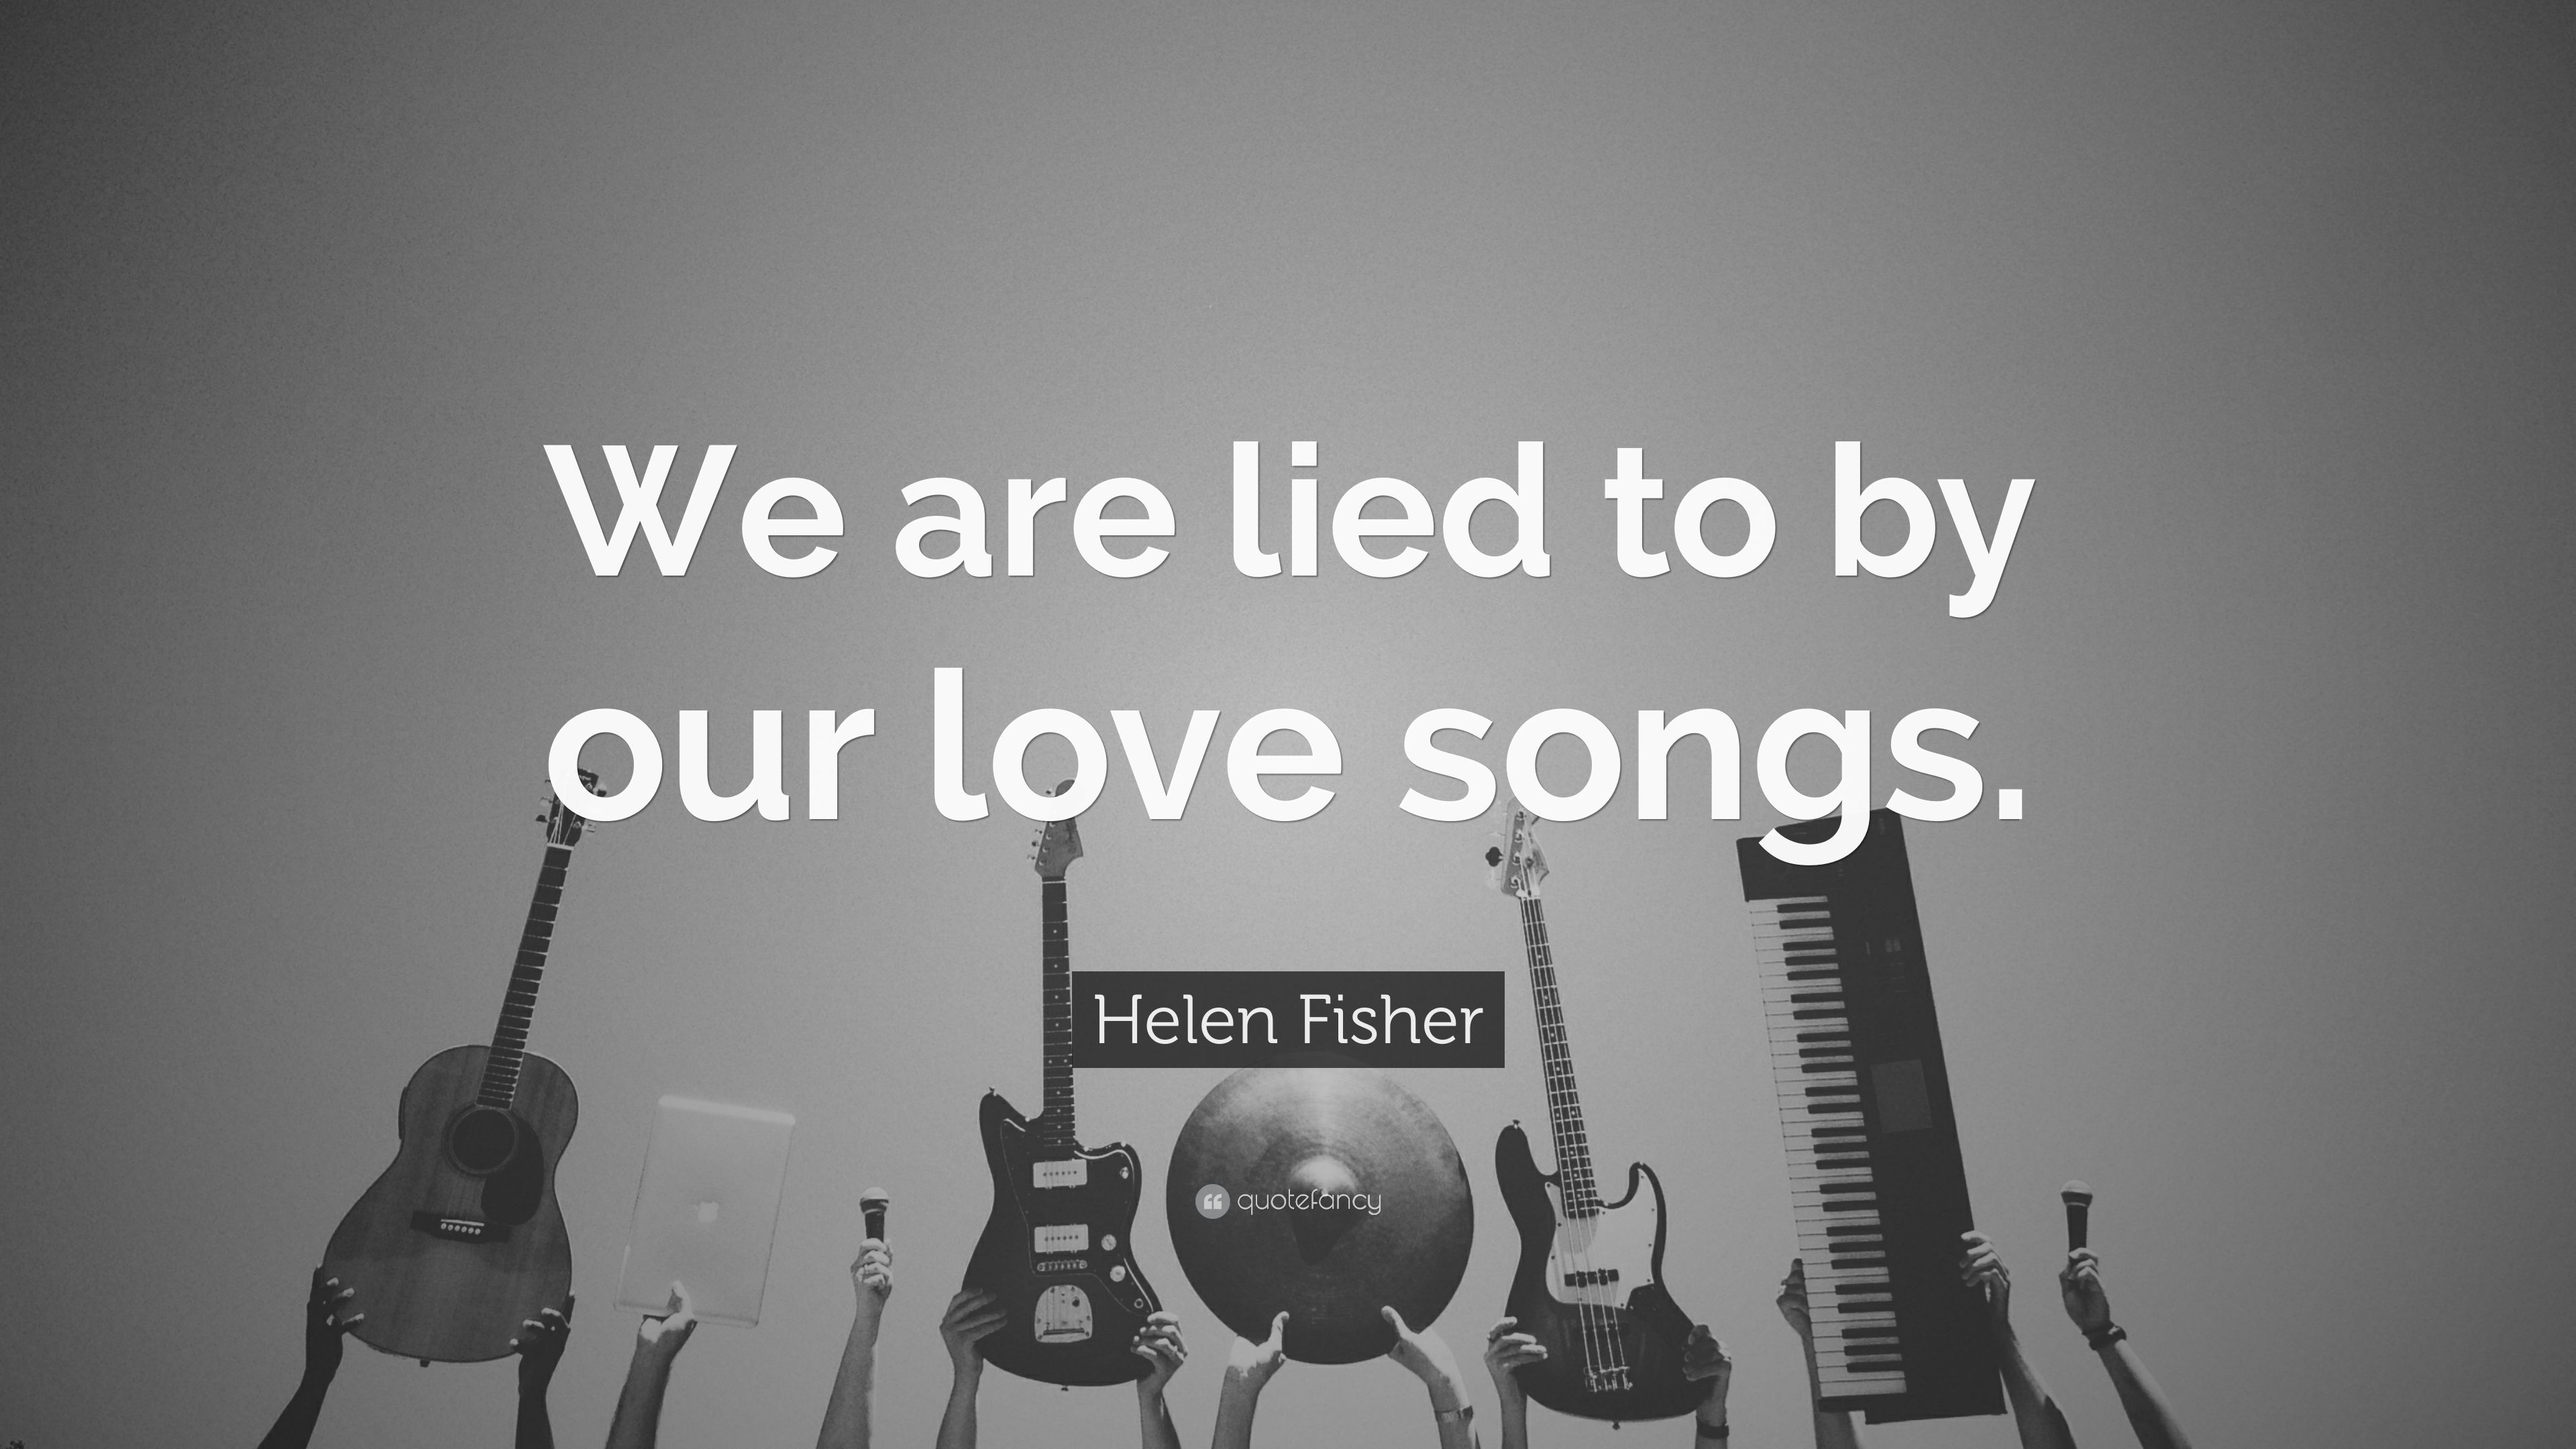 Helen Fisher Quote: “We are lied to by our love songs.” 7